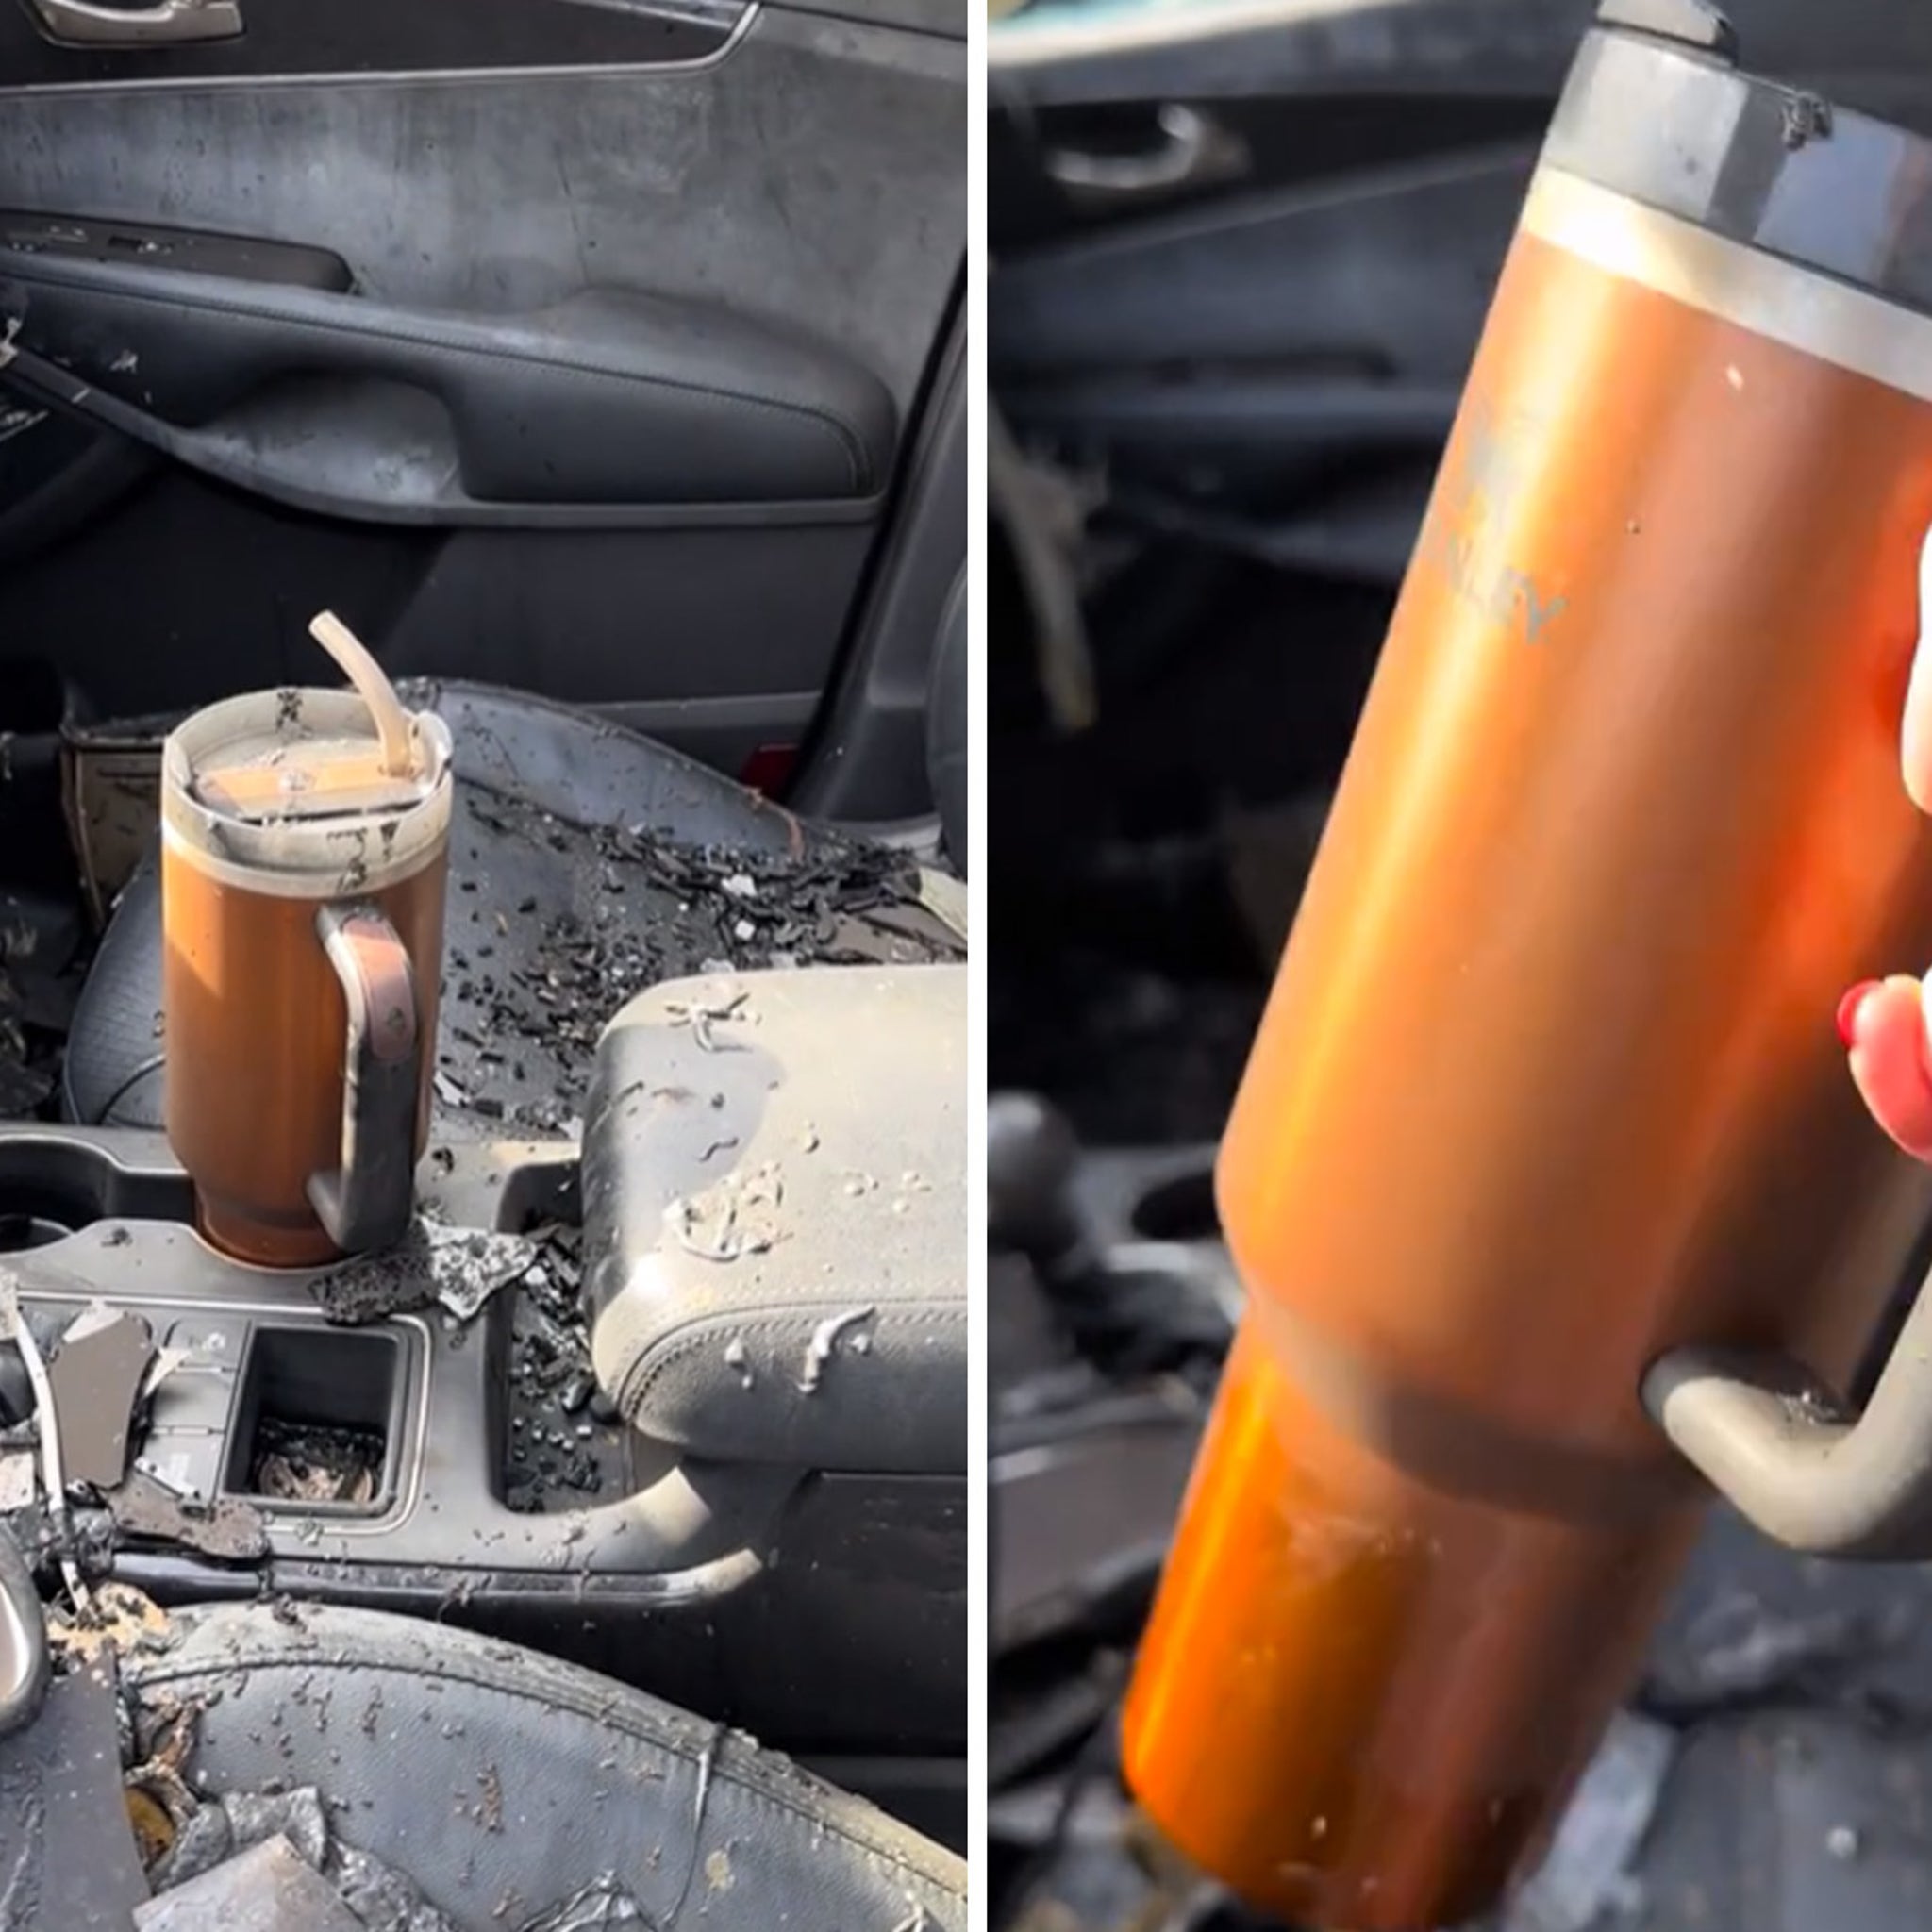 Woman Whose Cup Survived Car Fire Offered New Car by Stanley